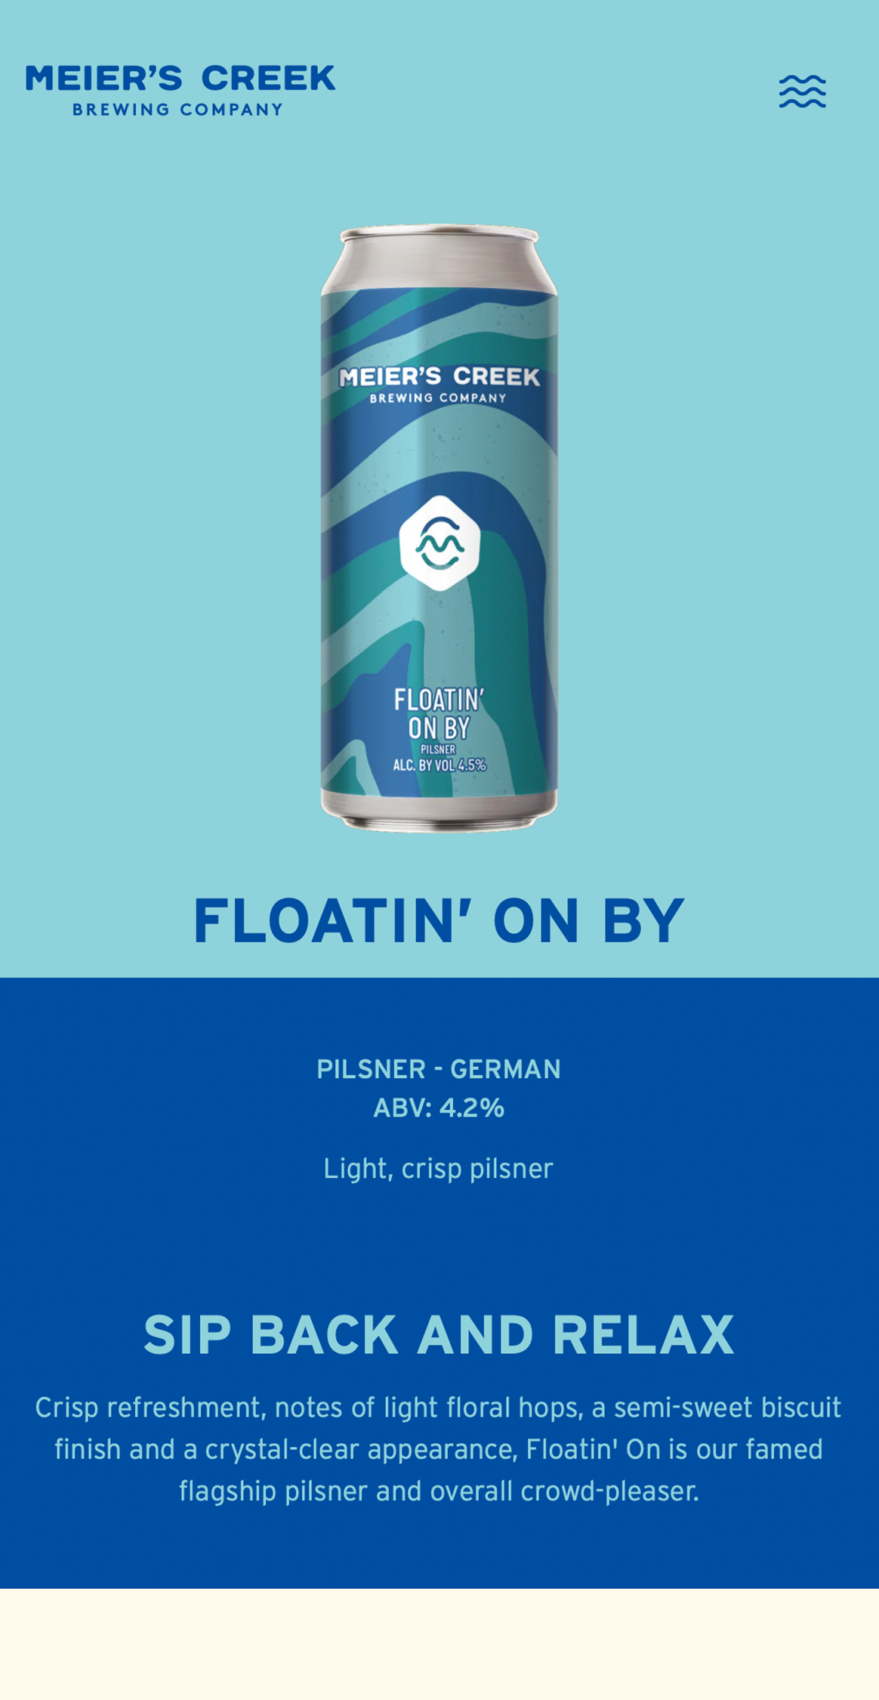 The Floatin' On By pilsner landing page on Meier's Creek Brewing Company's website in a mobile layout